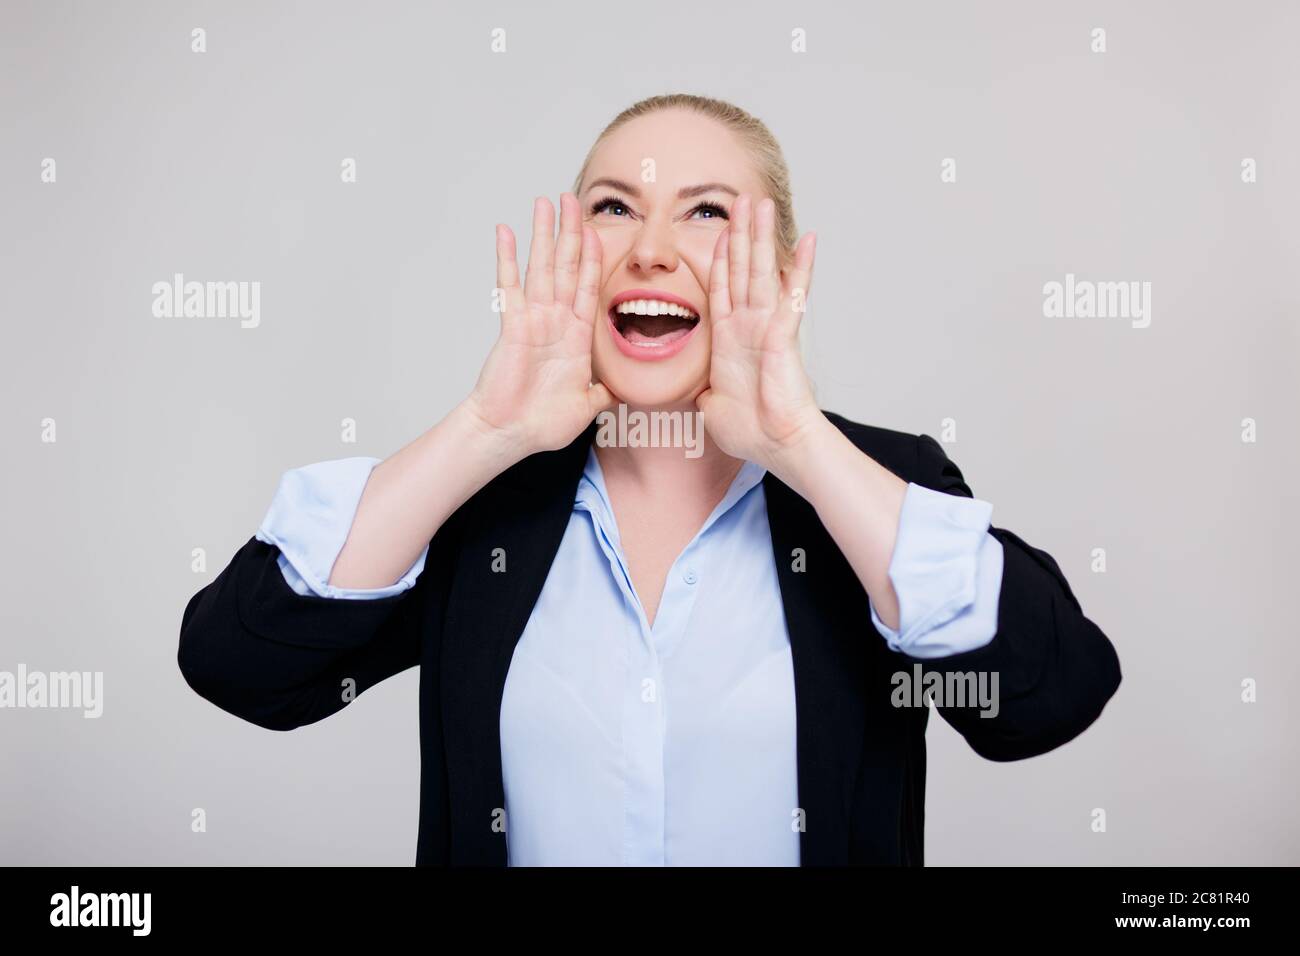 announcement or advertisement concept - happy blonde woman screaming about something over gray background Stock Photo